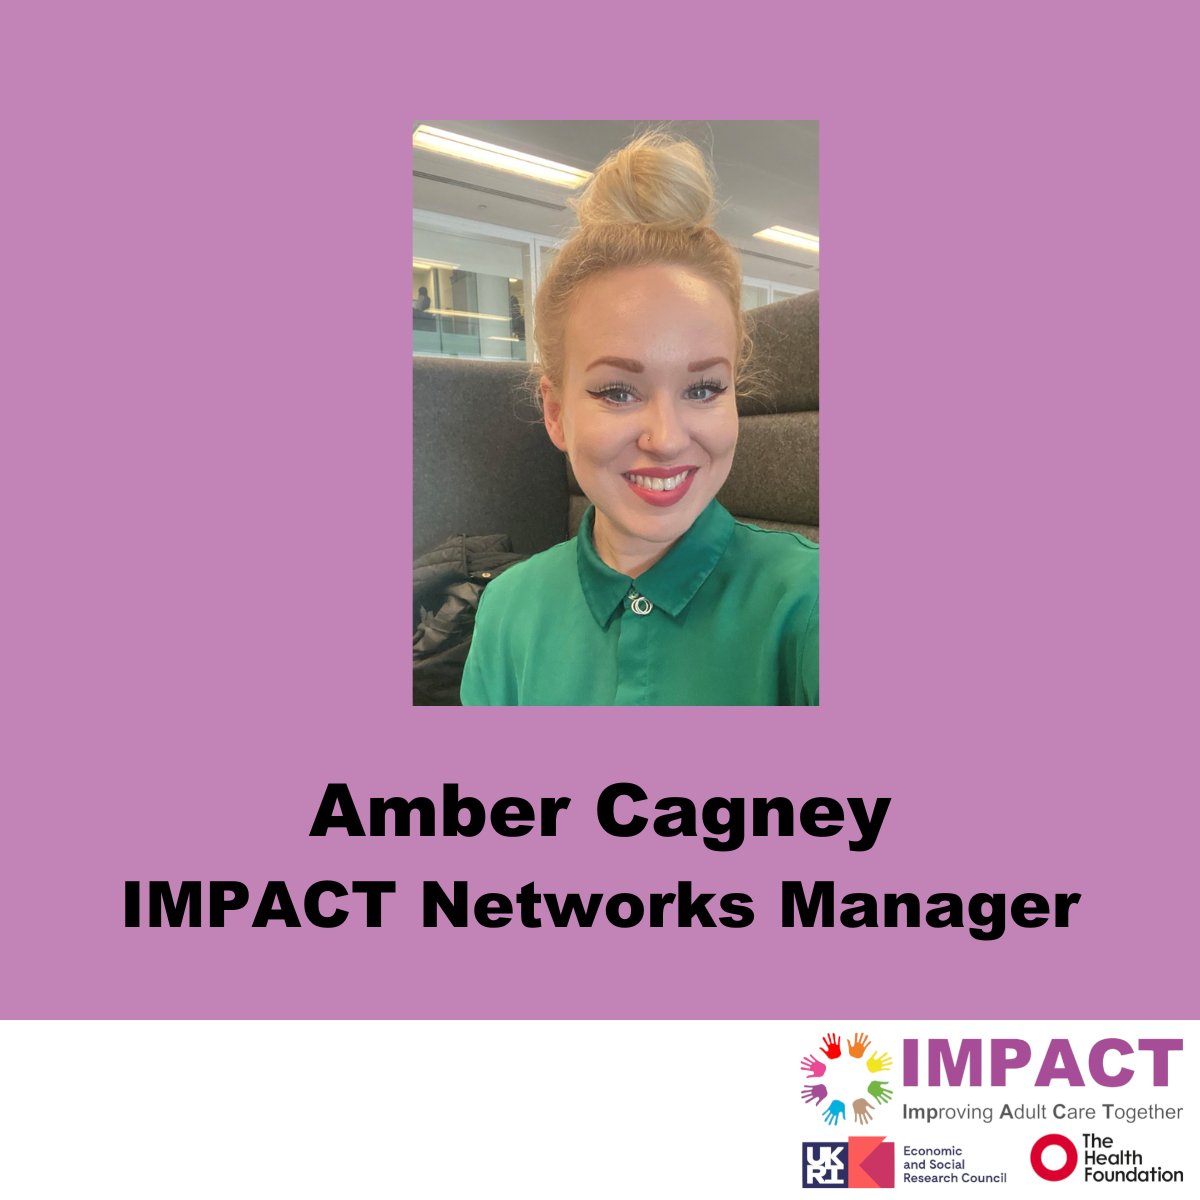 Amber Cagney, our #Networks Manager, has almost ten years of experience within the anti-slavery/anti-trafficking sector. Learn more about Amber and meet the rest of our team: ow.ly/30lm50Lbzs6 #IMPACTStaff